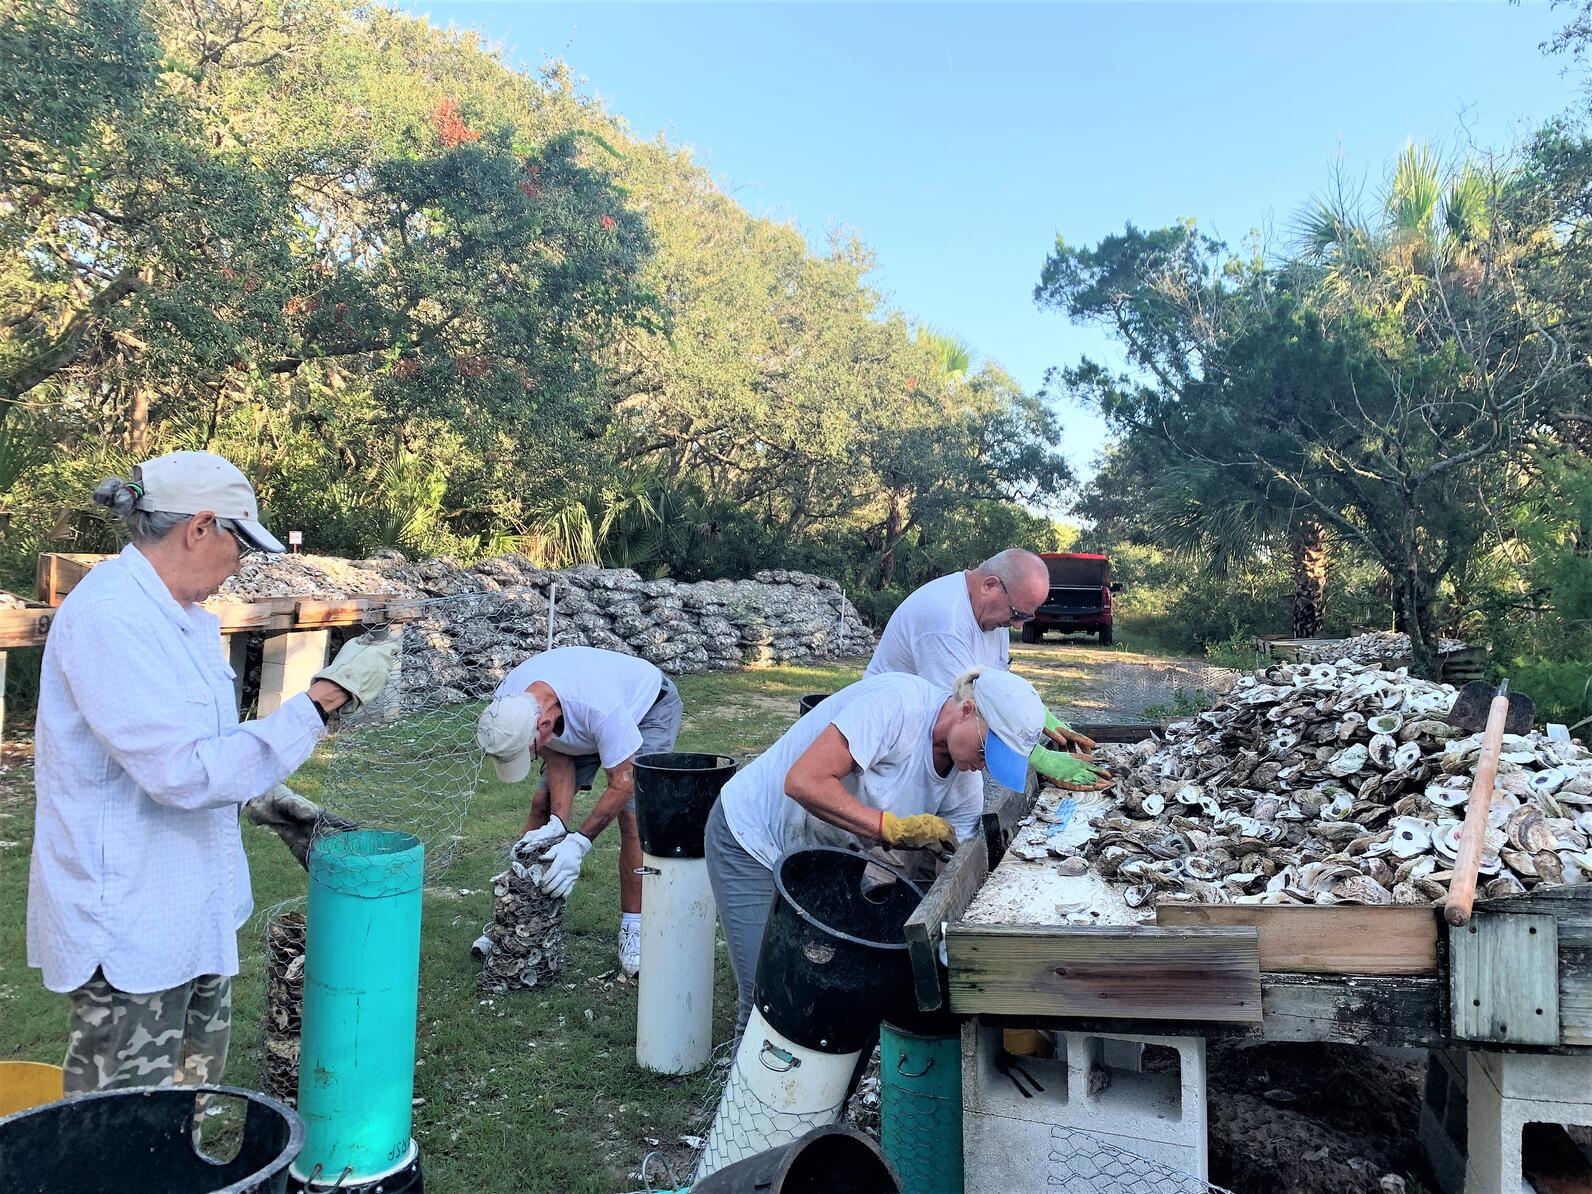 People assembling oyster reef materials